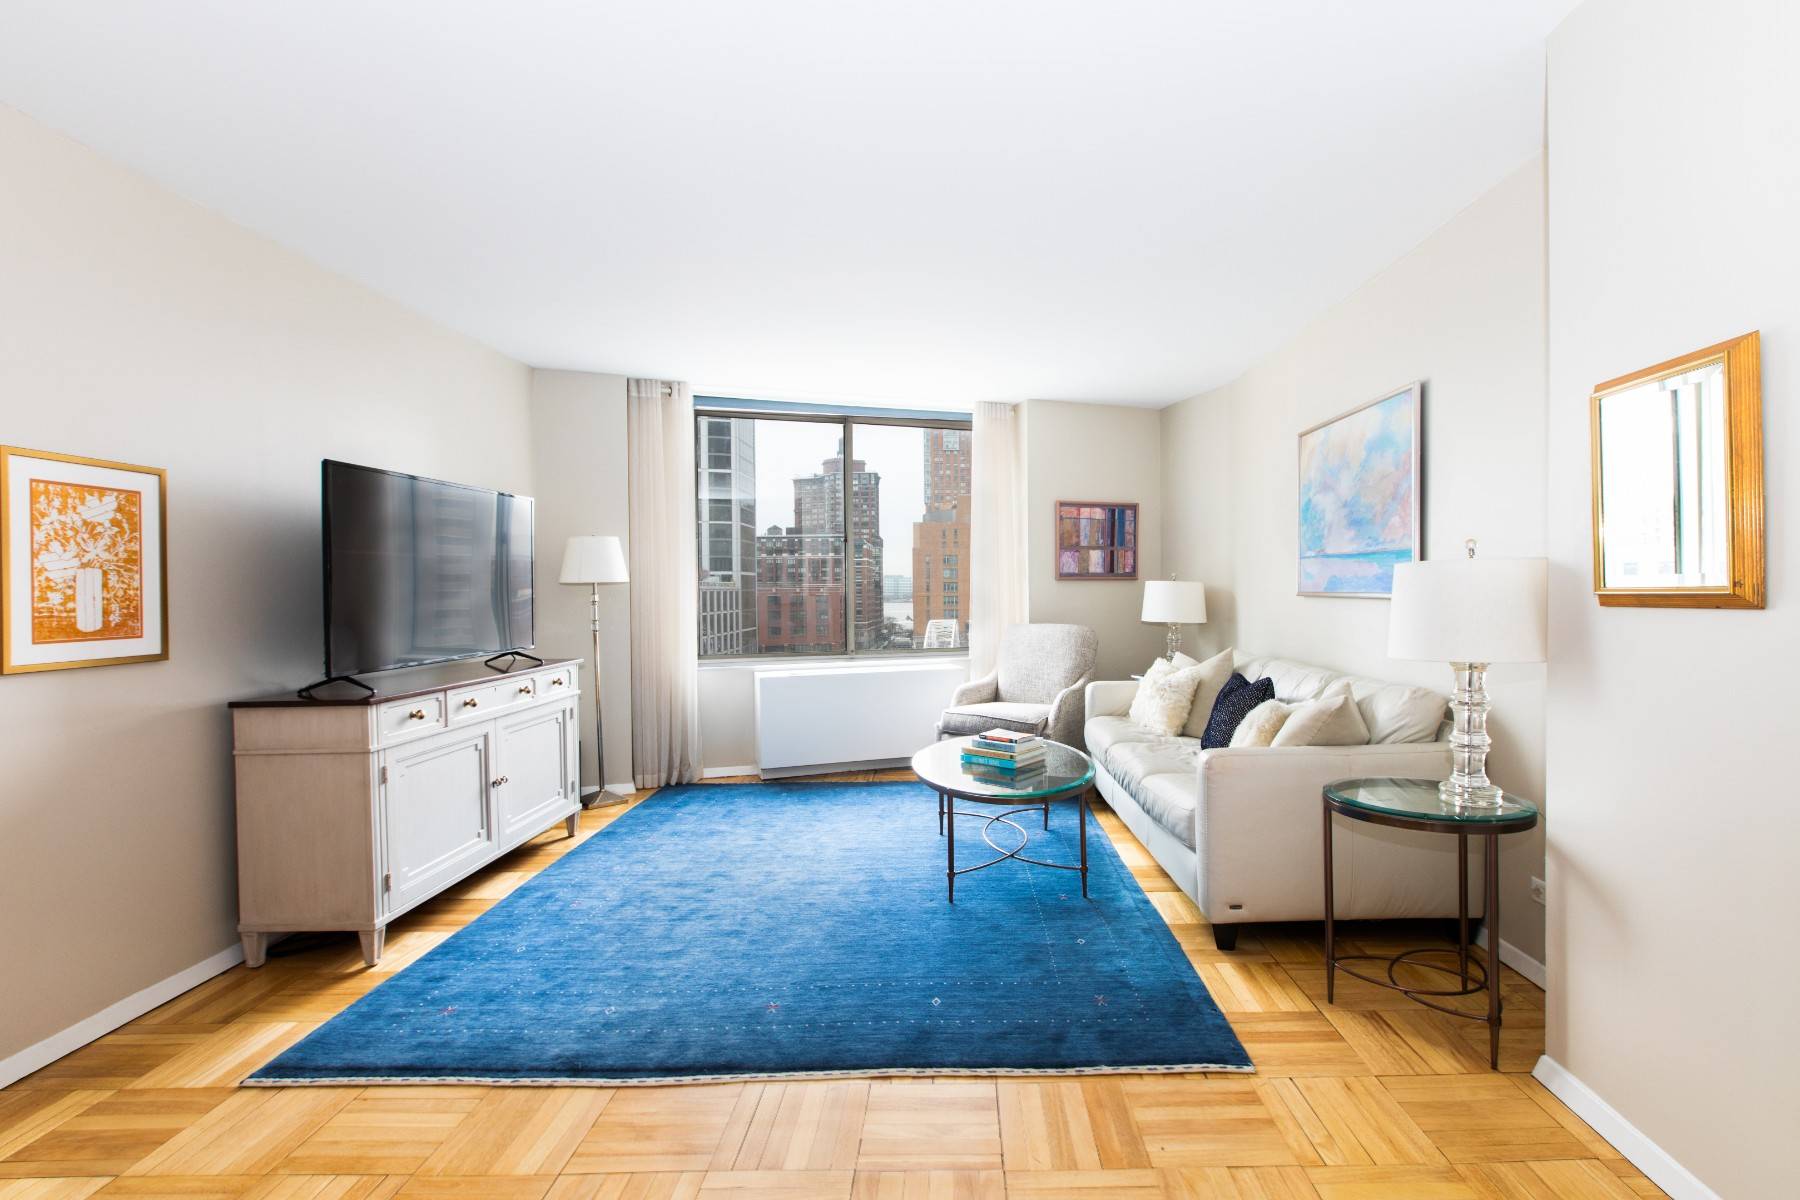 Located in the Heart of TriBeCa, this massive 1 bedroom, 1 bathroom Condo located in The TriBeCa with Hudson River Views is truly unique.